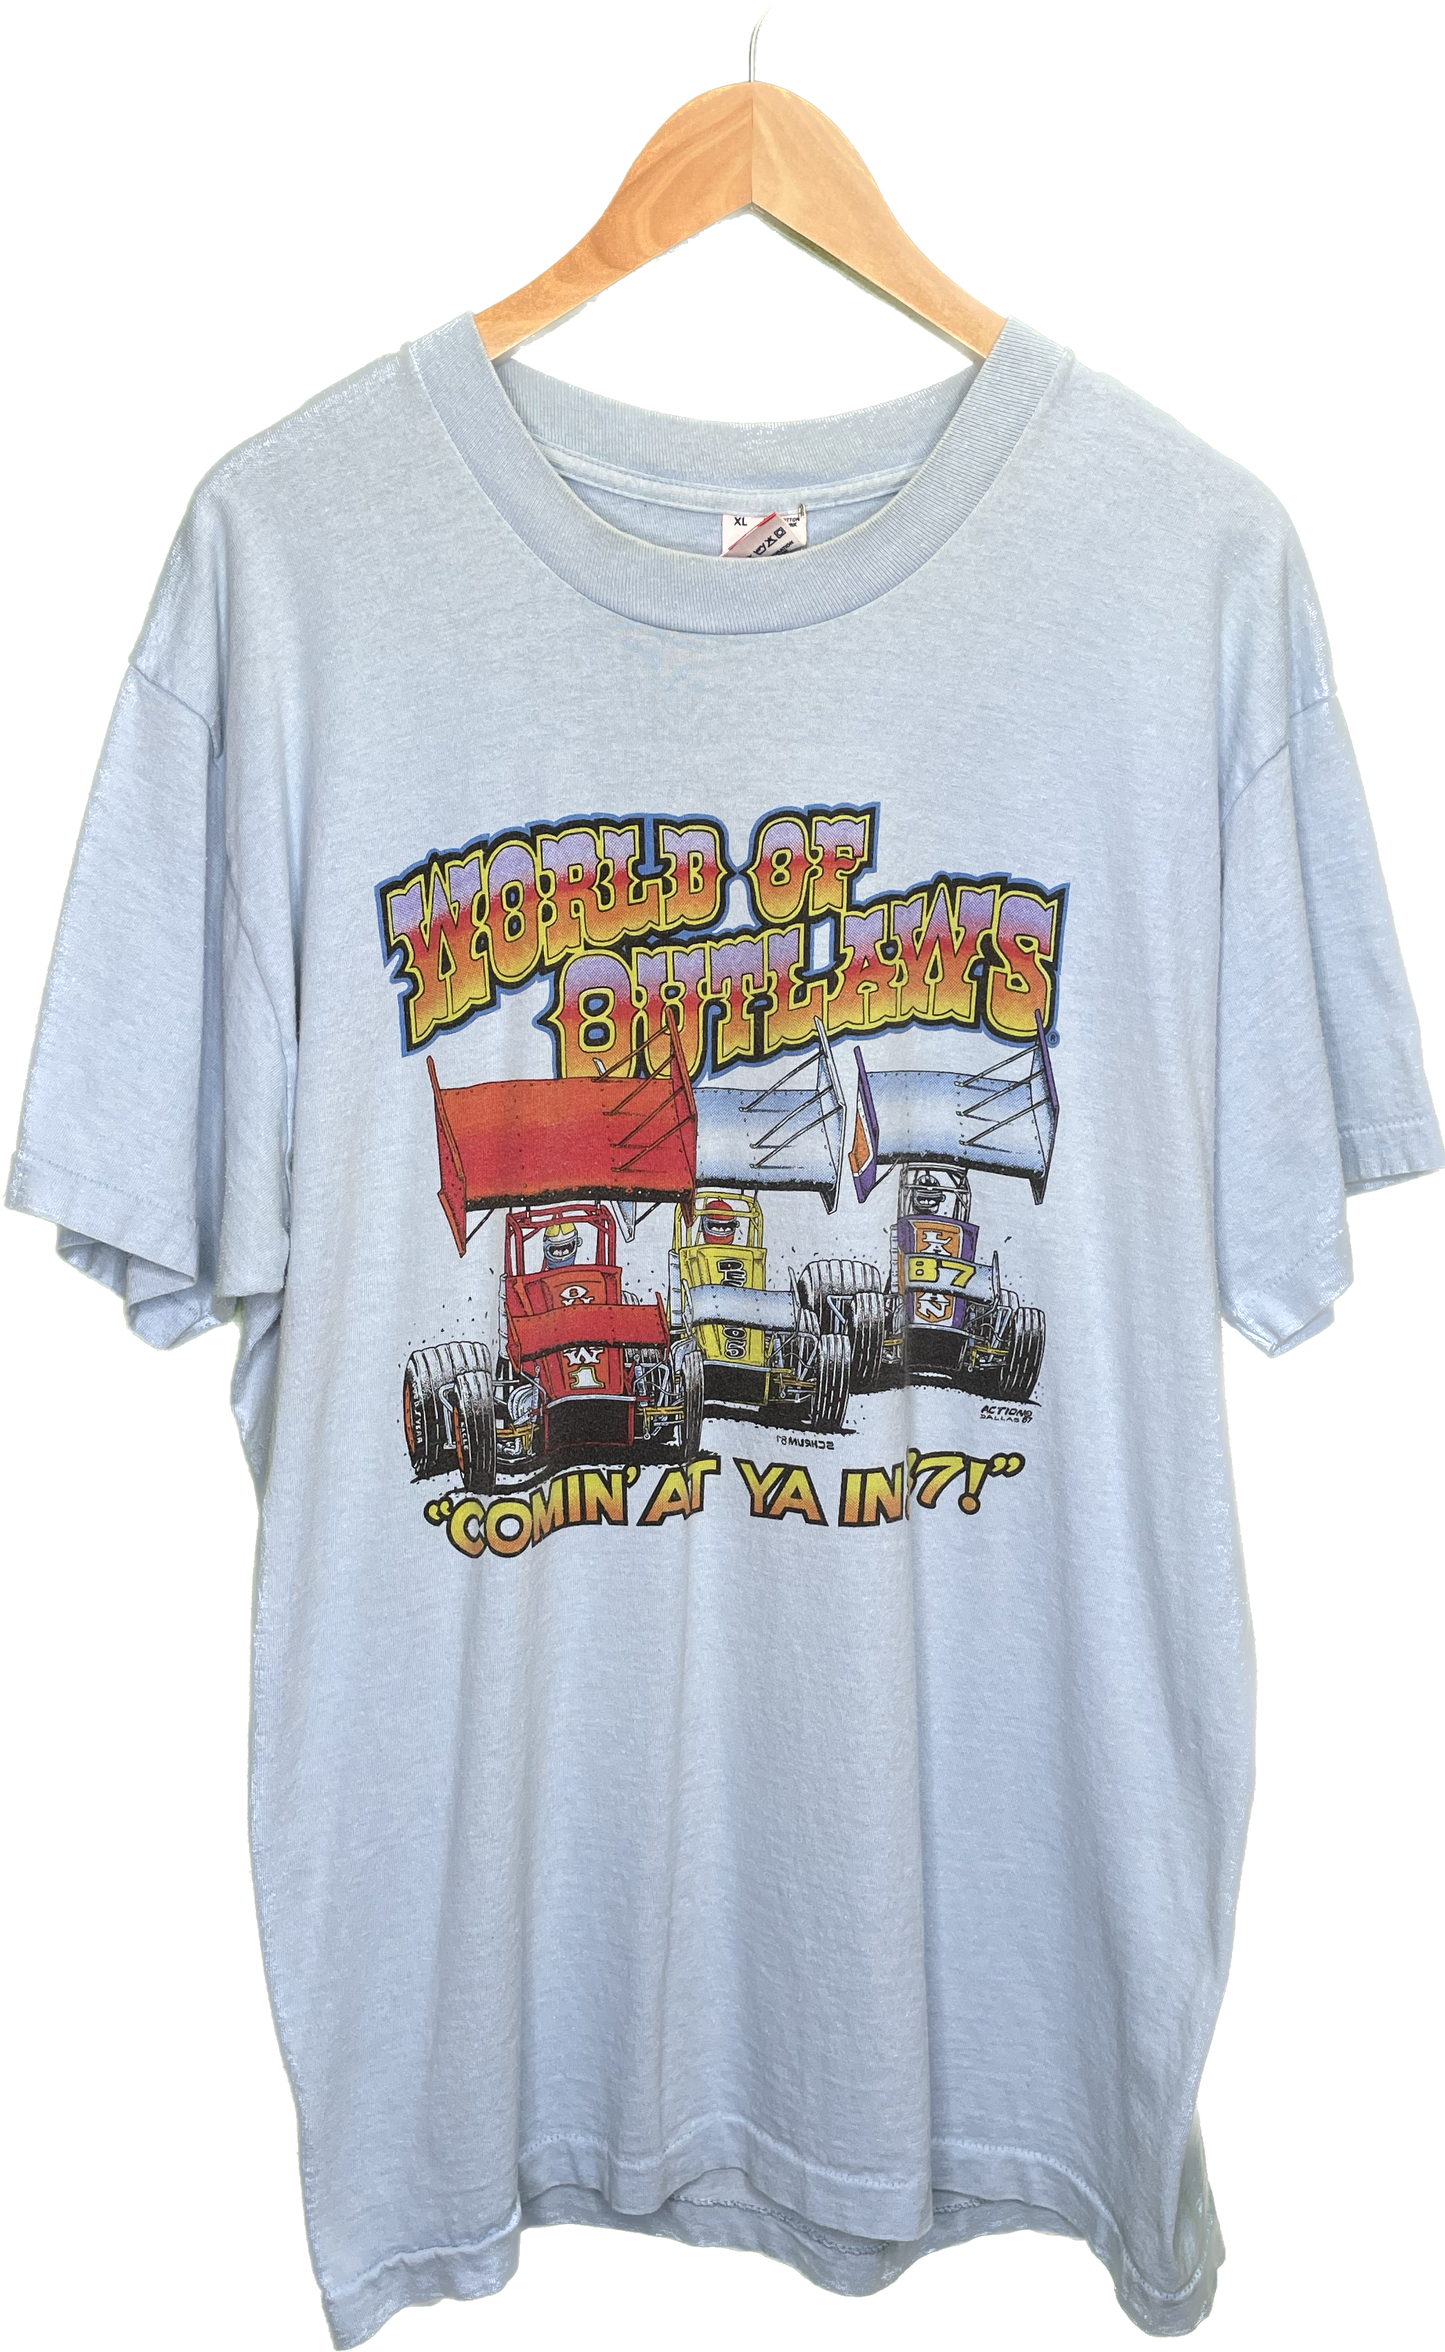 Vintage XL 80s World Of Outlaws Dirt Track Racing T-Shirt